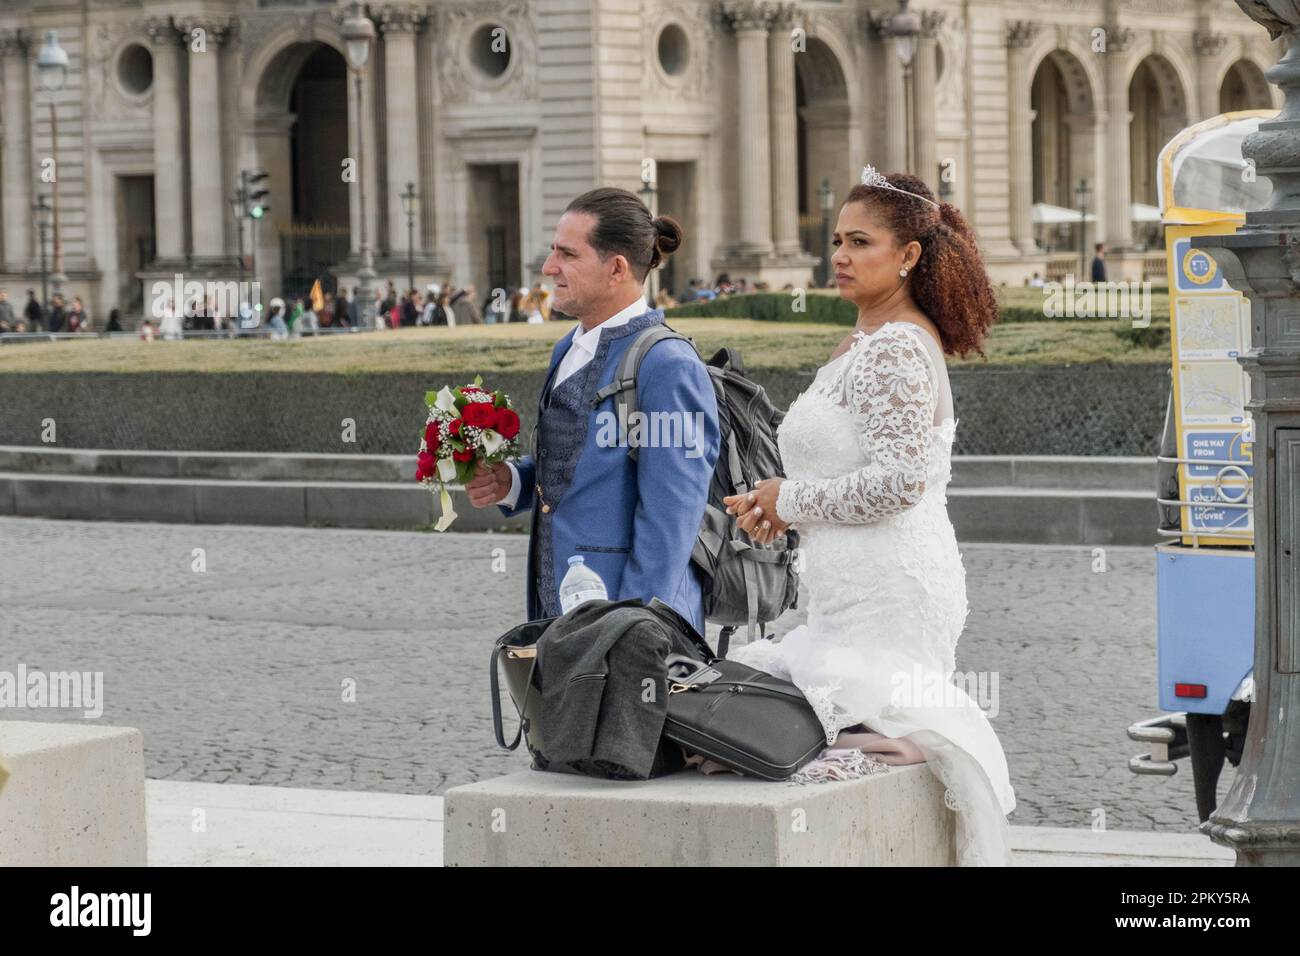 Celebrating Love in the City of Romance: A Beautiful Couple Embracing their Special Day in Paris Stock Photo